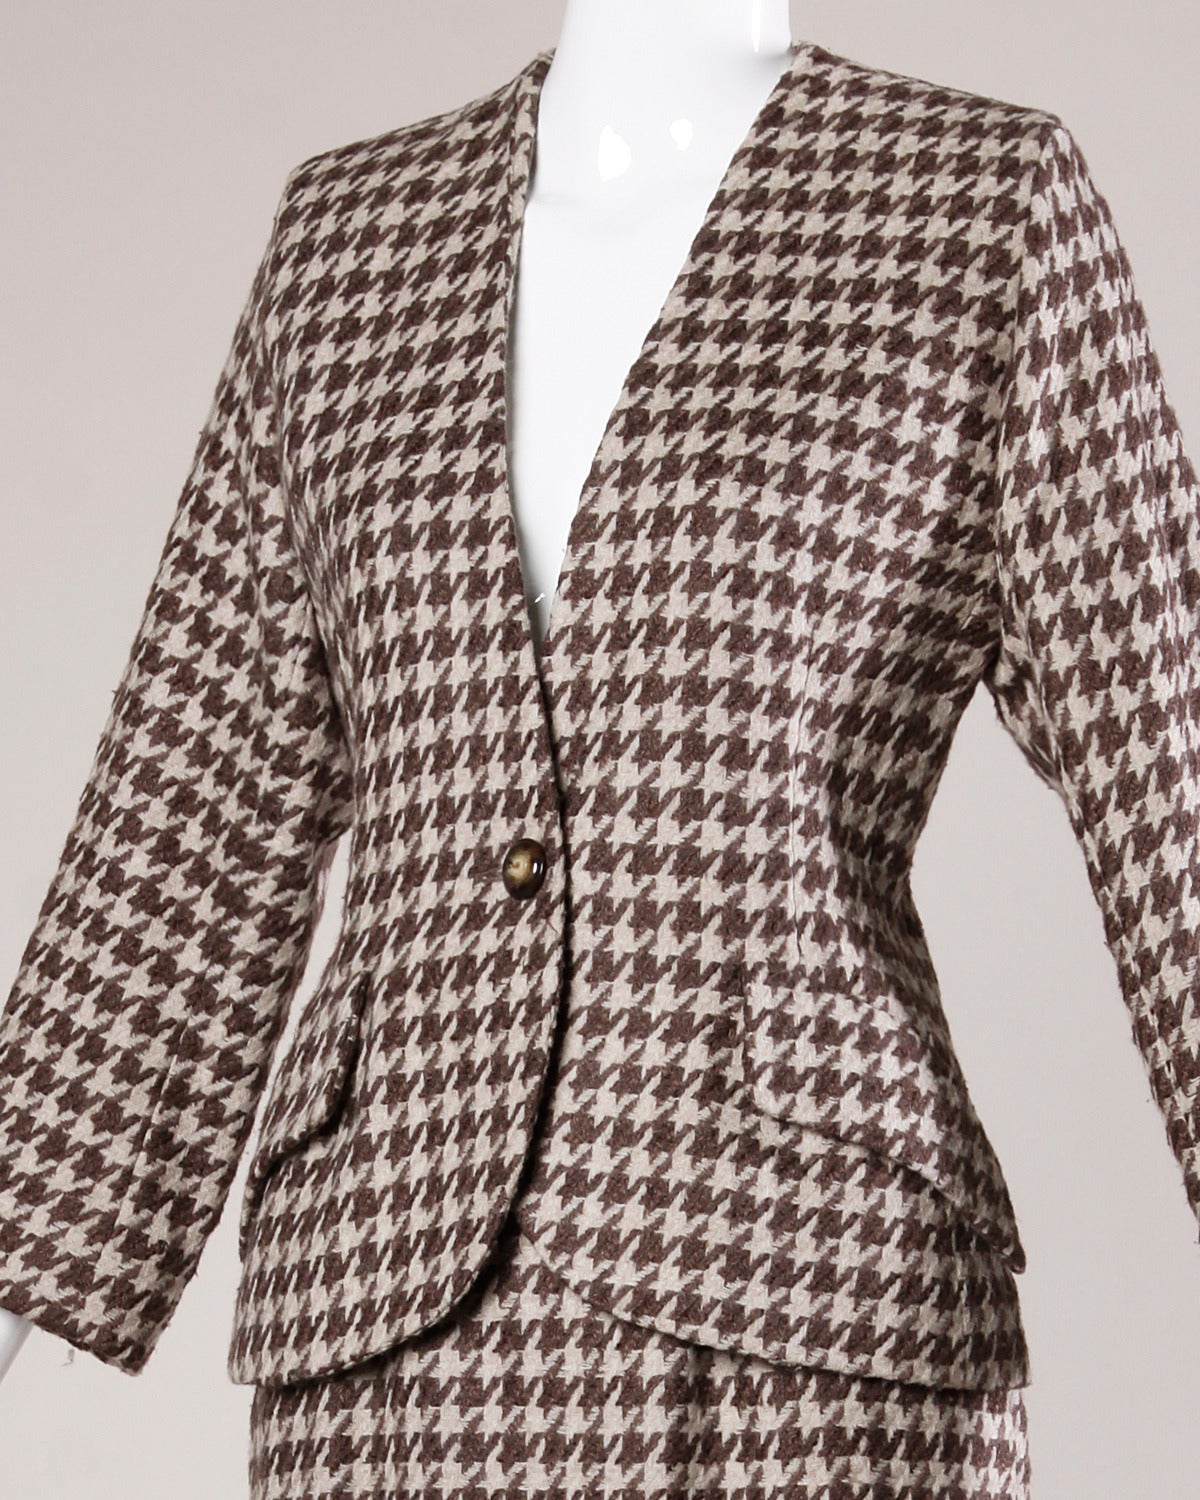 Brown and beige houndstooth skirt suit by Christian Dior. Wear together or separately!

Details:

Fully Lined
Front Pockets
Structured Shoulder Pads Are Sewn Into Lining
Front Button Closure On Jacket
Back Zip Button Closure On Skirt
Marked